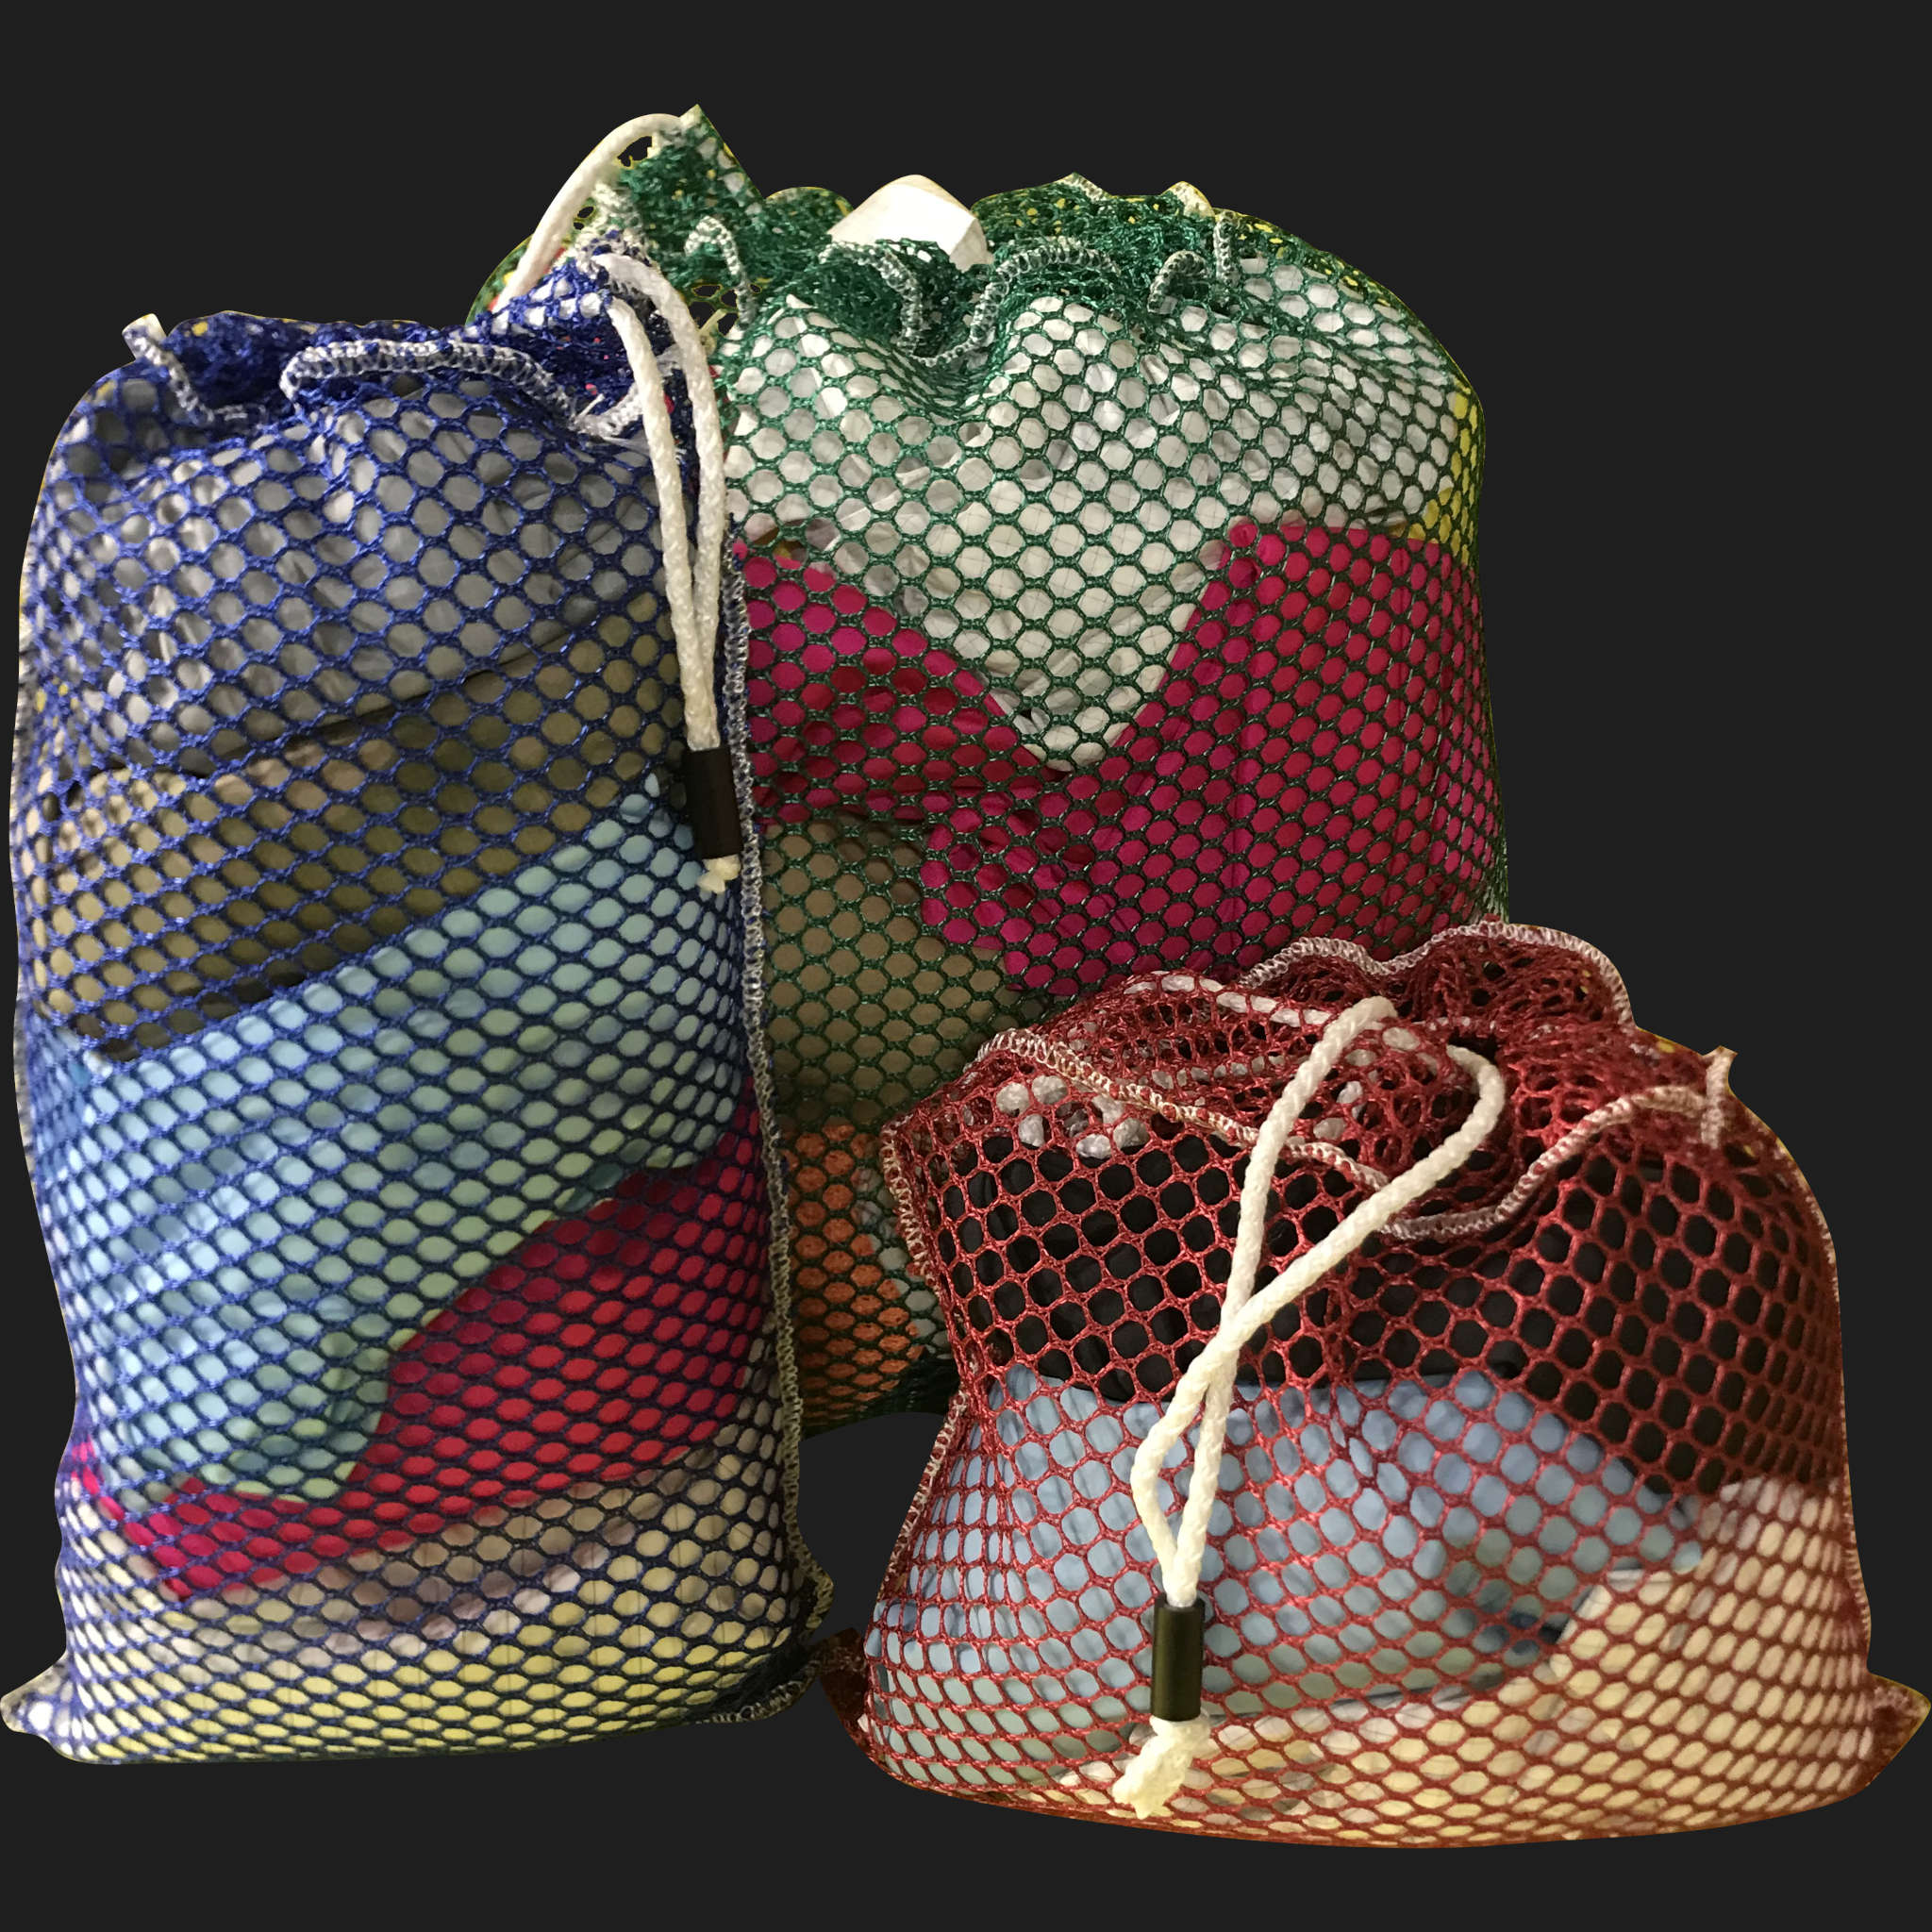 26" x 50" Customized Mesh-Net-Laundry Bags Heavy Duty with Cord and barrellock closure